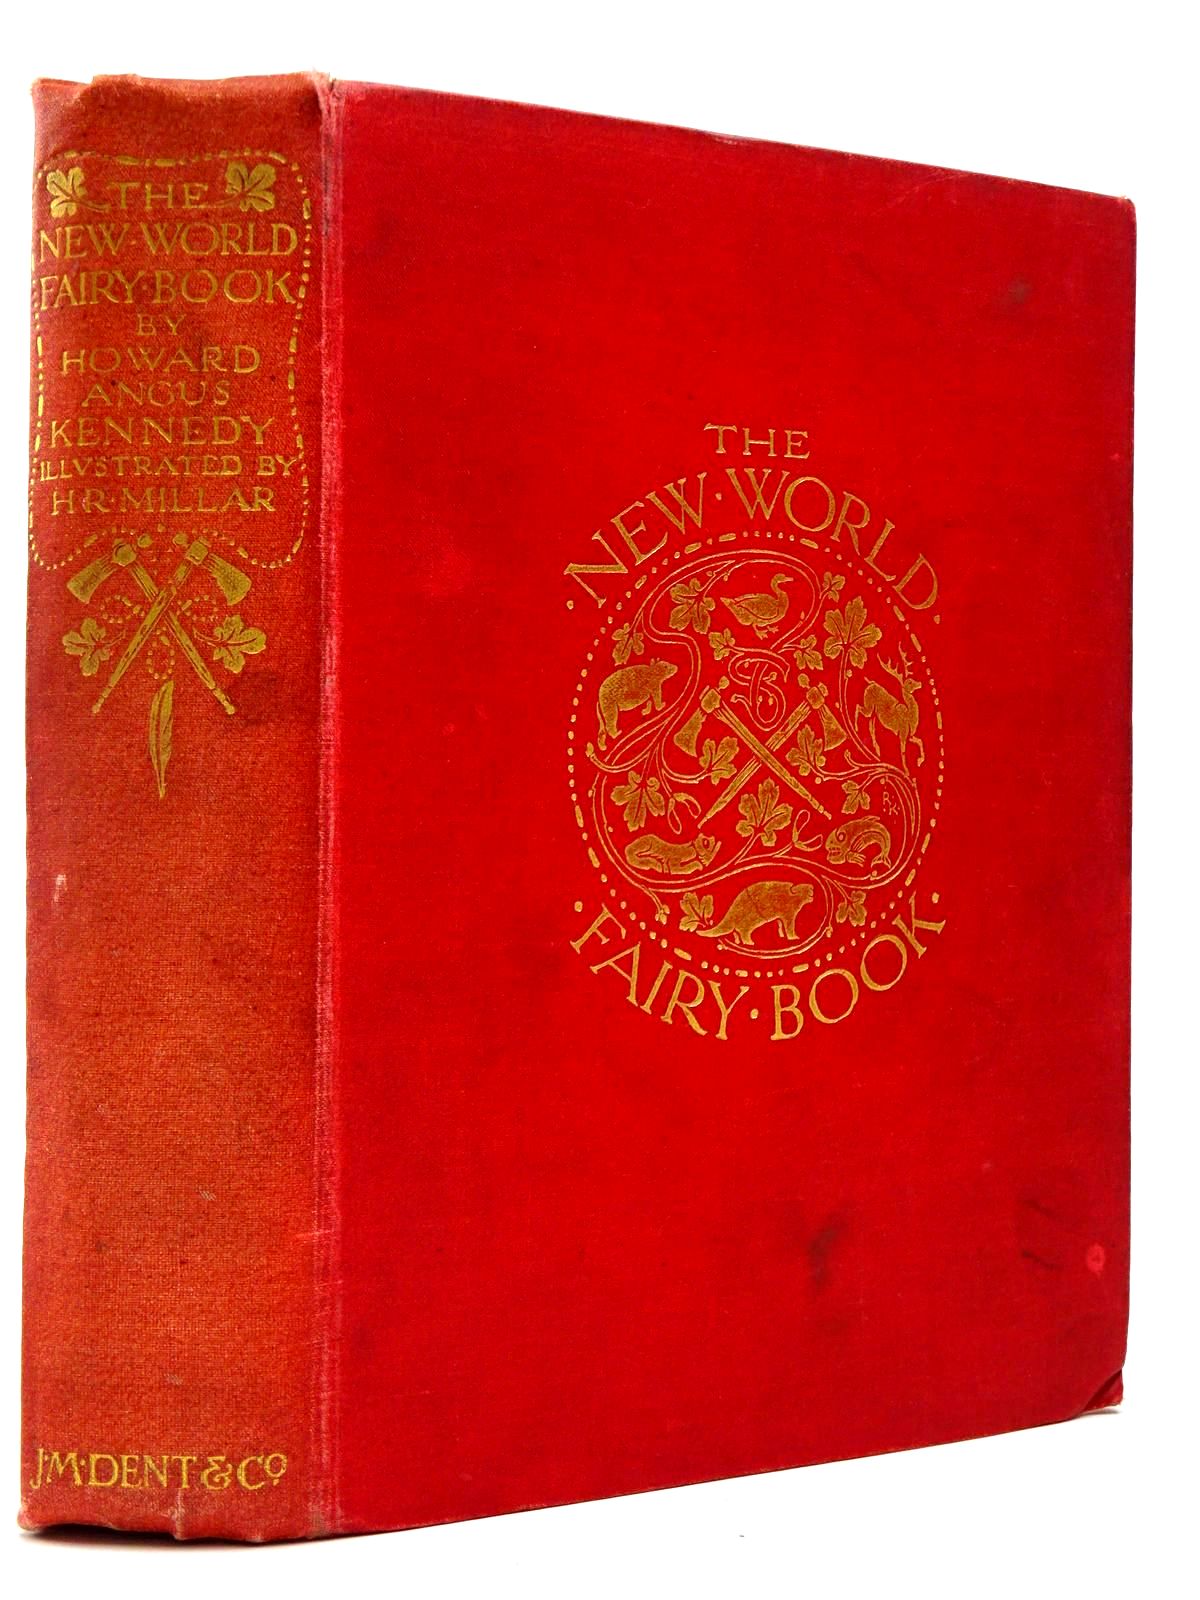 Photo of THE NEW WORLD FAIRY BOOK written by Kennedy, Howard Angus illustrated by Millar, H.R. published by J.M. Dent &amp; Co. (STOCK CODE: 2129852)  for sale by Stella & Rose's Books